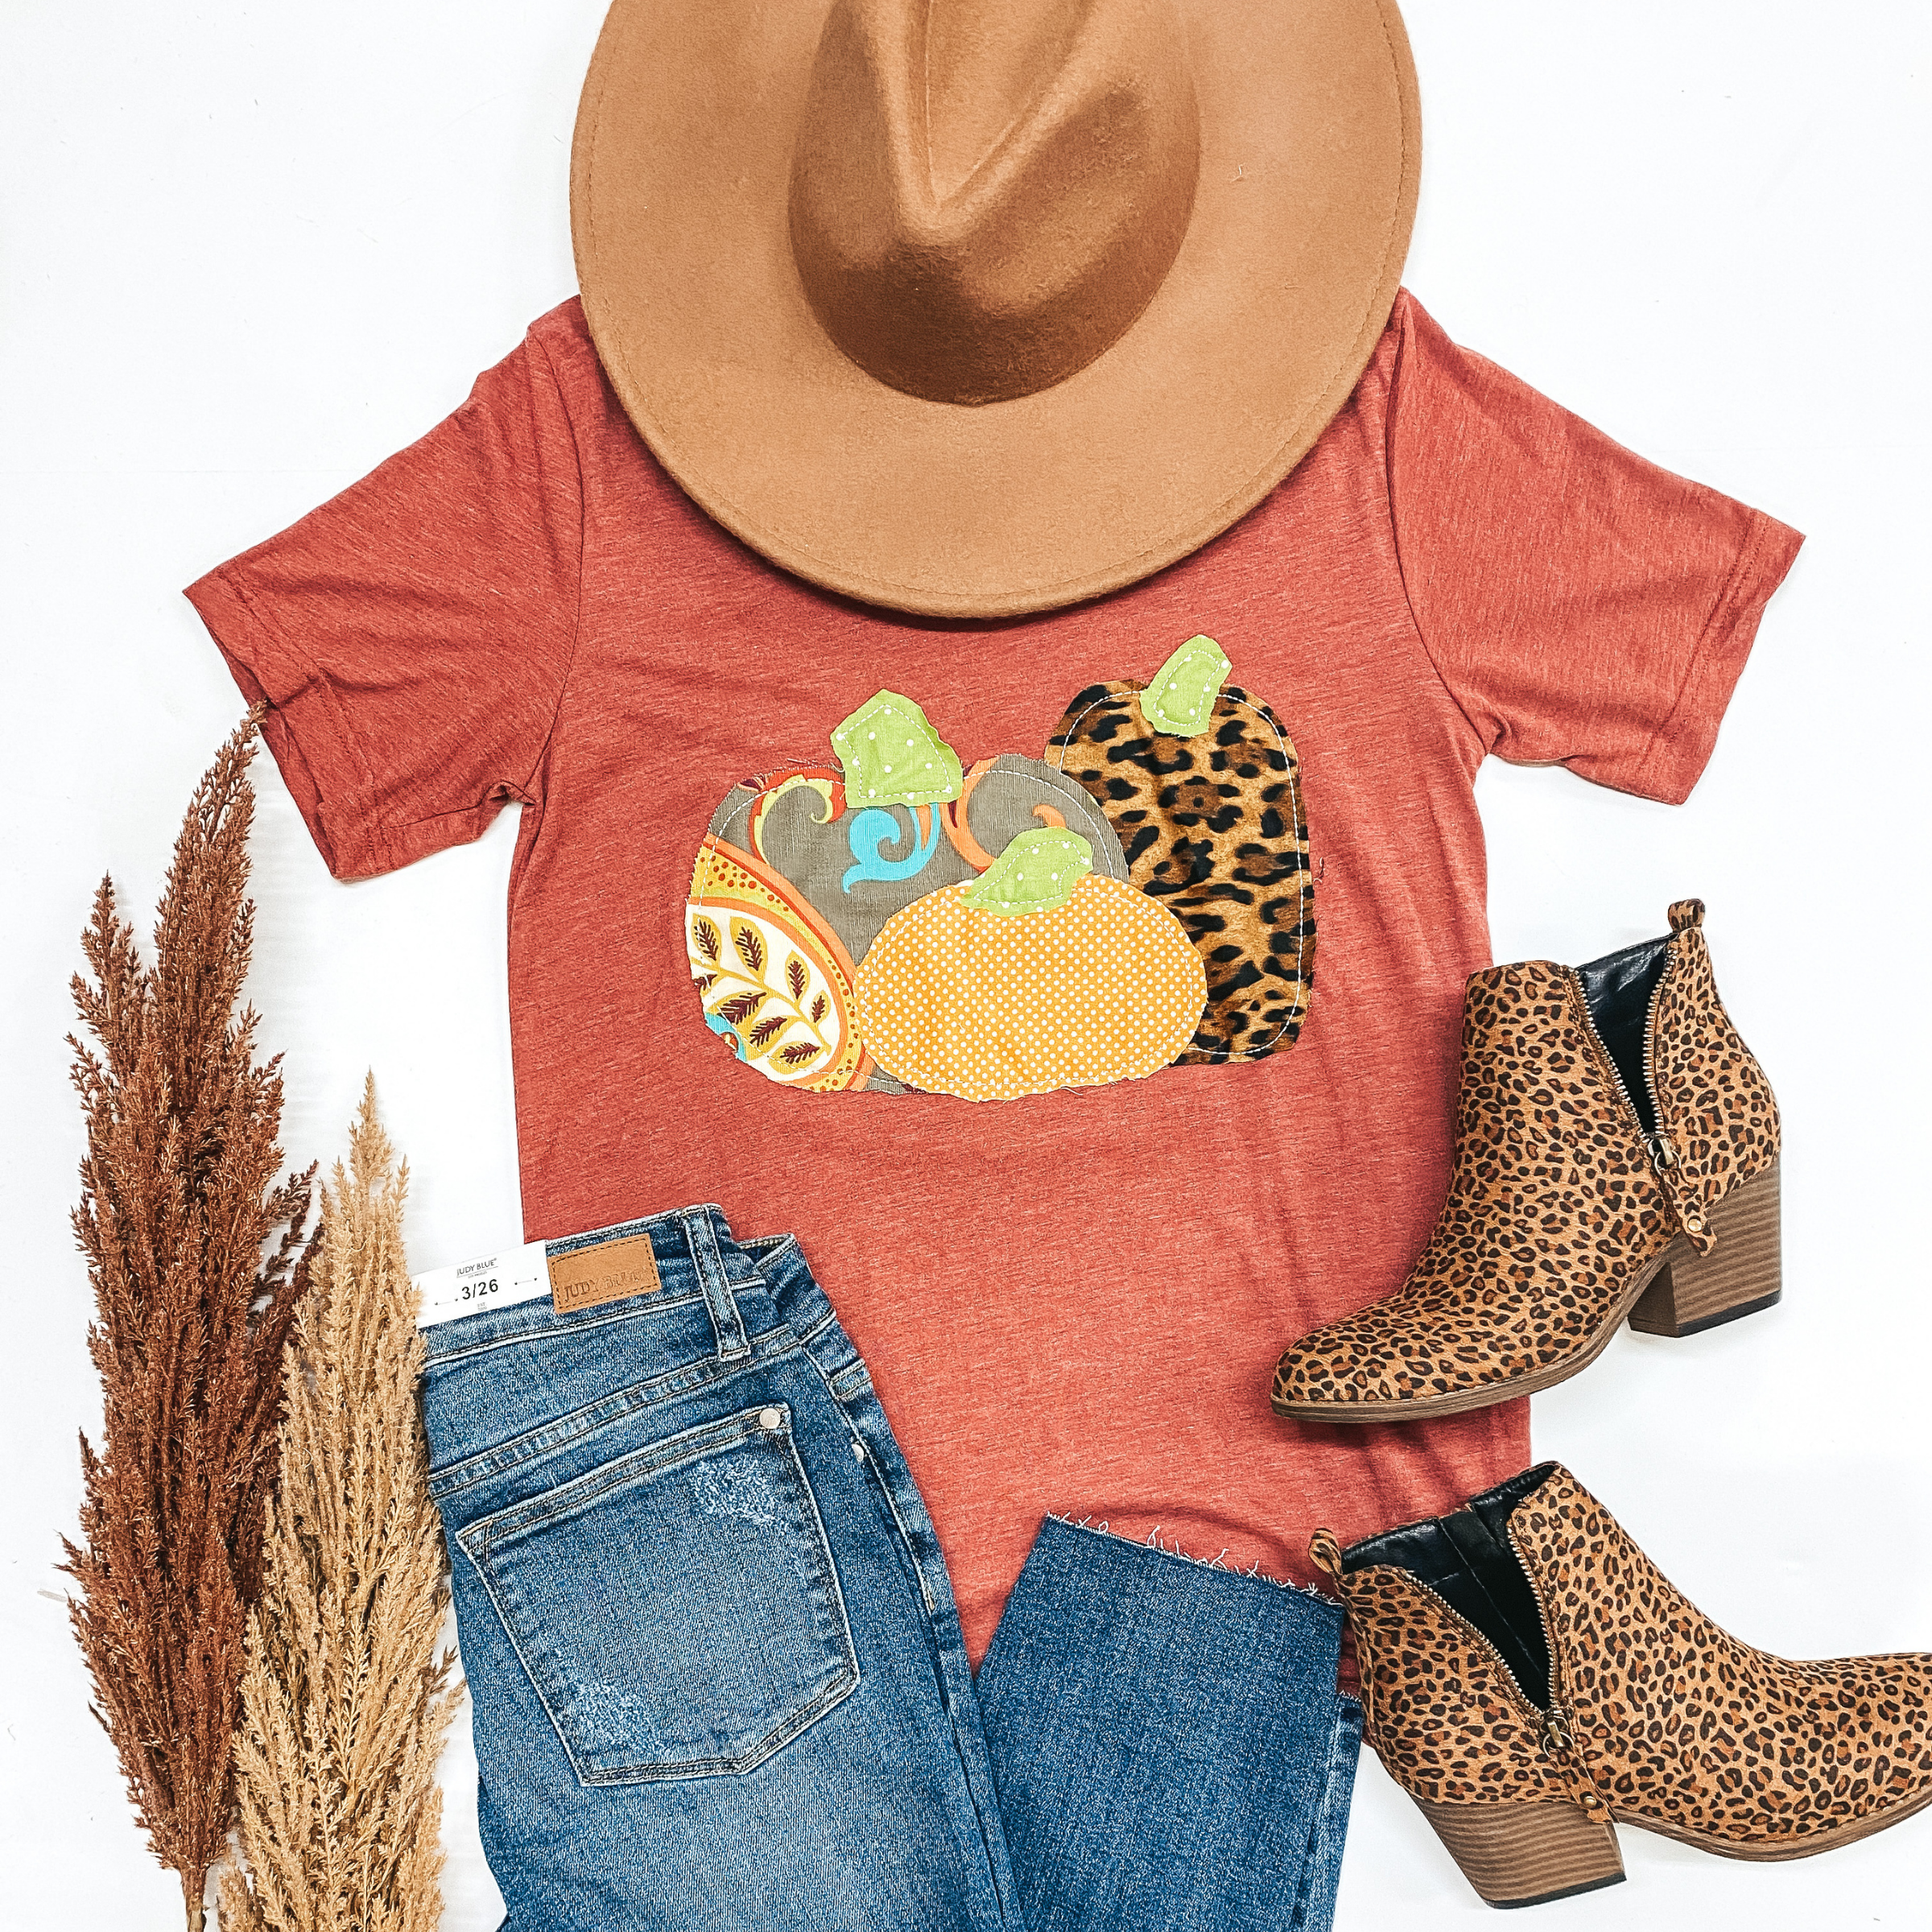 Pumpkin Patch Short Sleeve Tee Shirt with Hand Sewn Pumpkins in Clay - Giddy Up Glamour Boutique